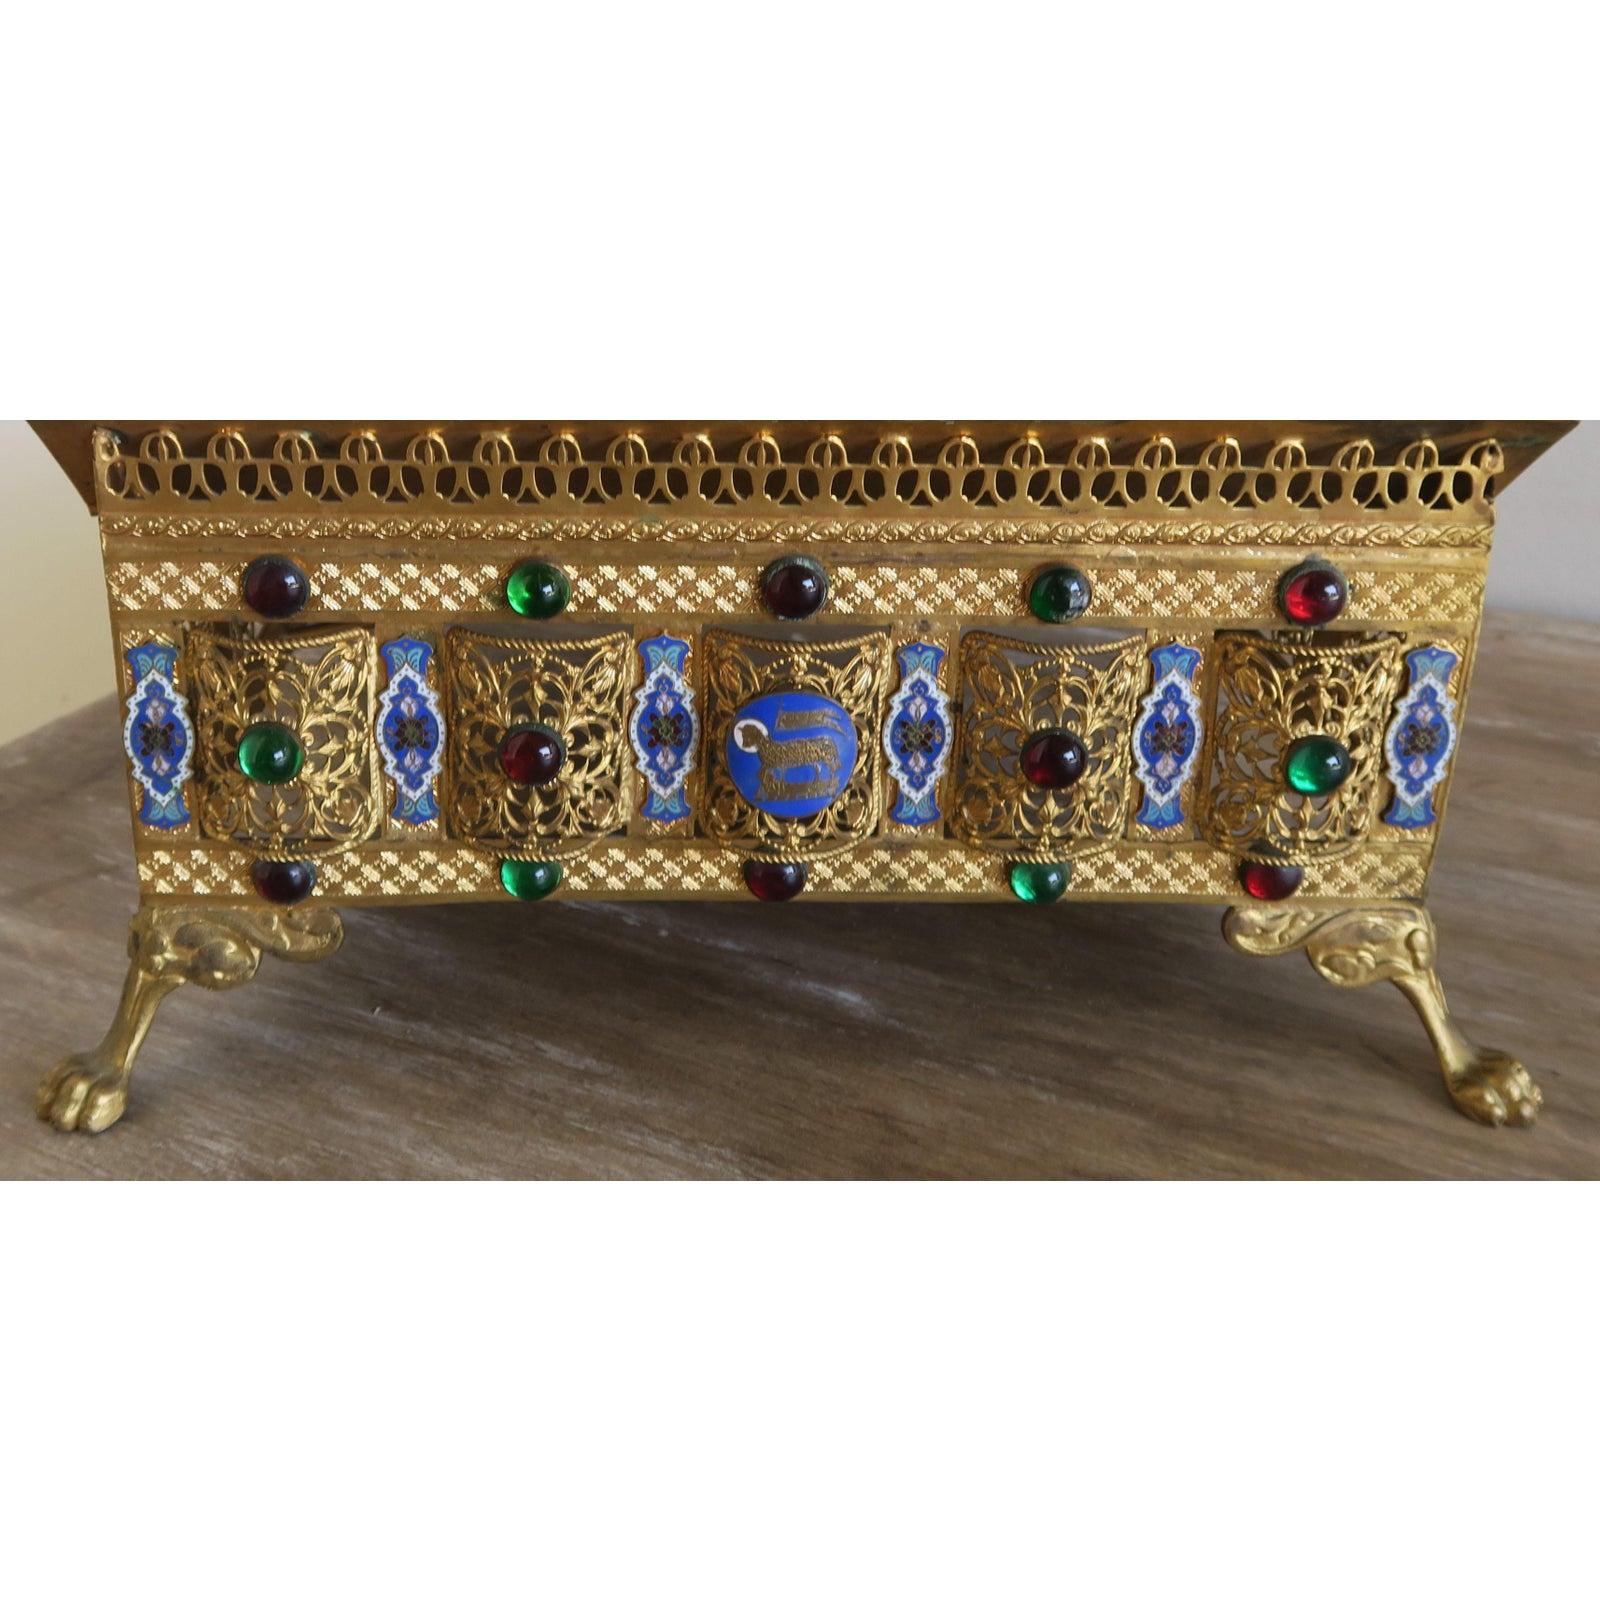 This elegant, antique Bible holder was crafted in France, circa 1870. The ornate, adjustable book stand has a large engraved cross on the front with six oval cloisonné medallions under the gallery surrounded by beautiful round stones, intricate